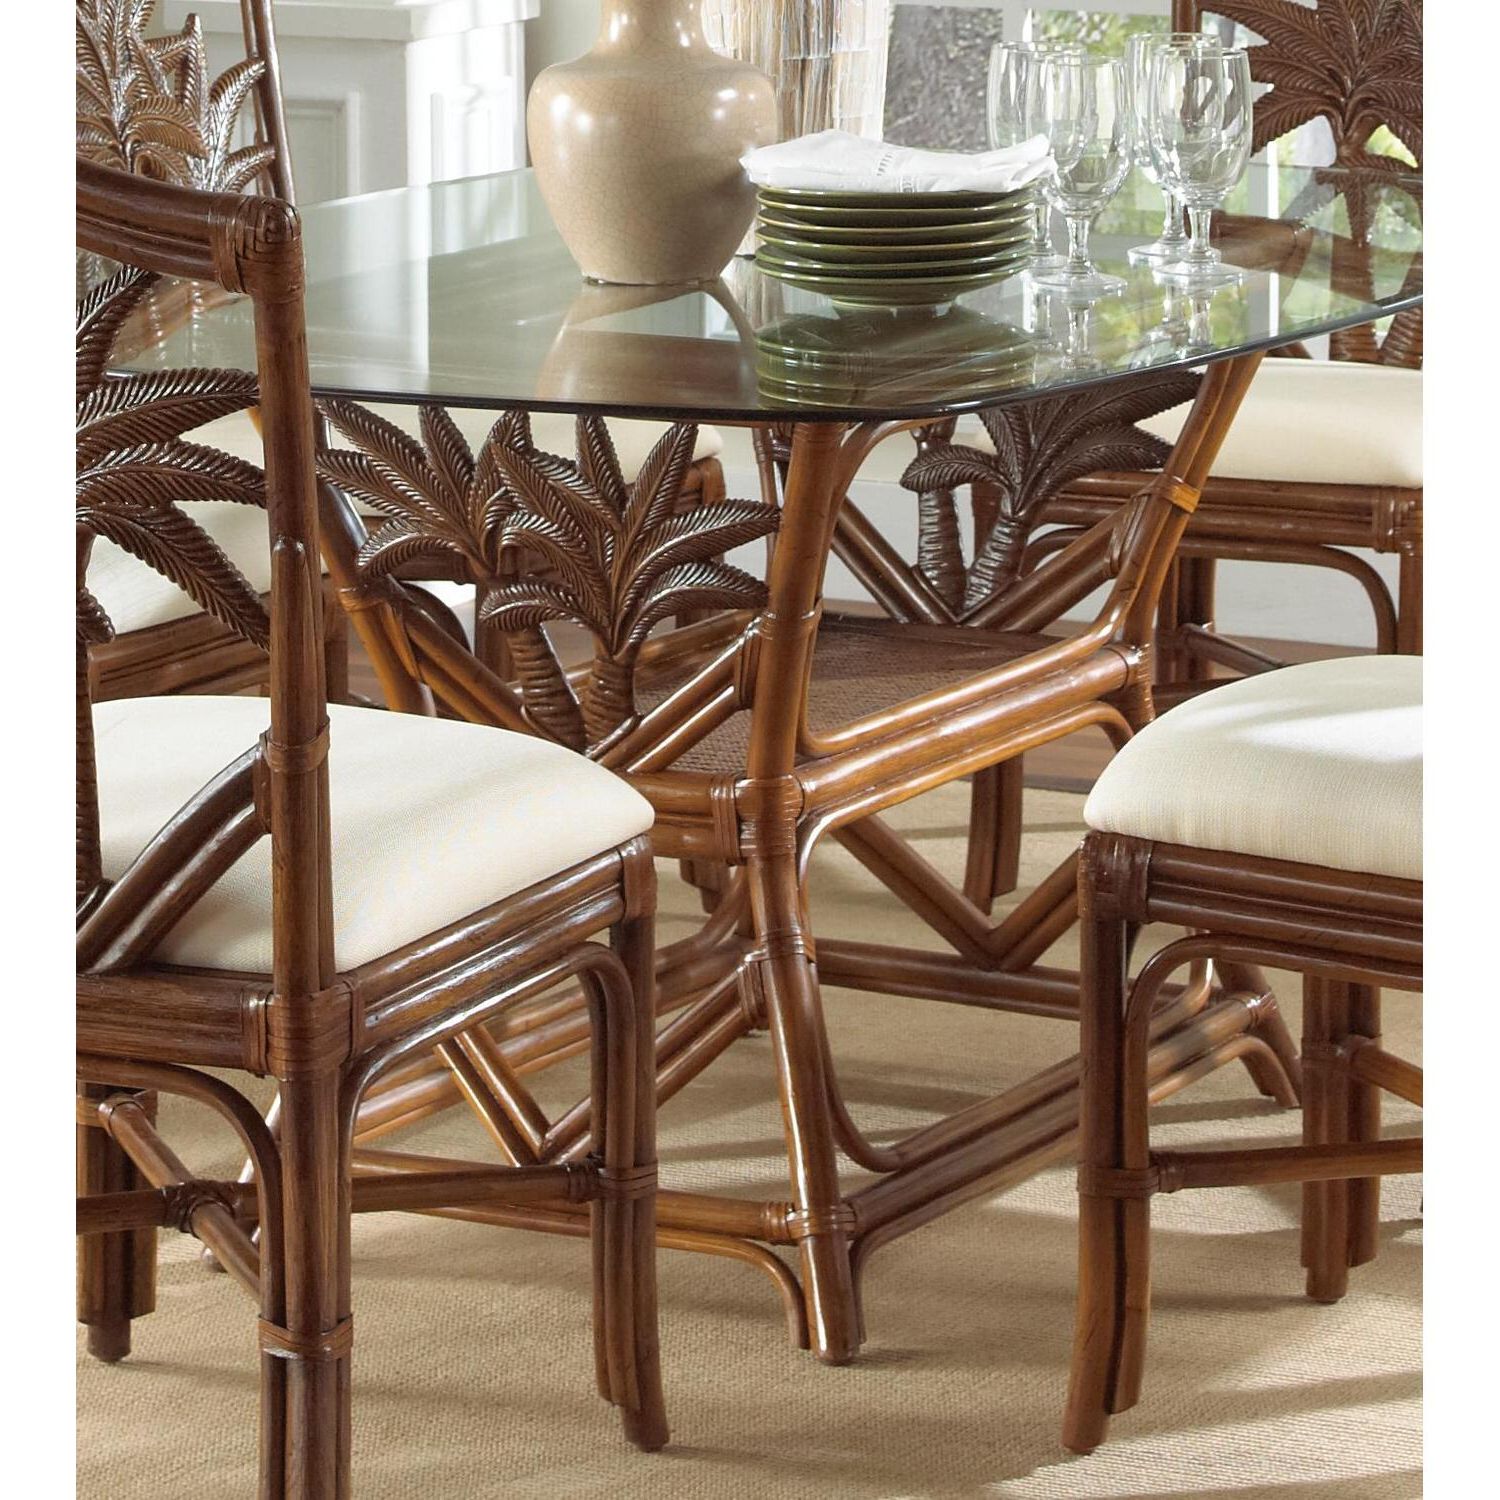 Current Distressed Wicker Patio Dining Set Pertaining To Rattan Dining Room Chairs – Californian Bungalow Interior Design (View 12 of 15)